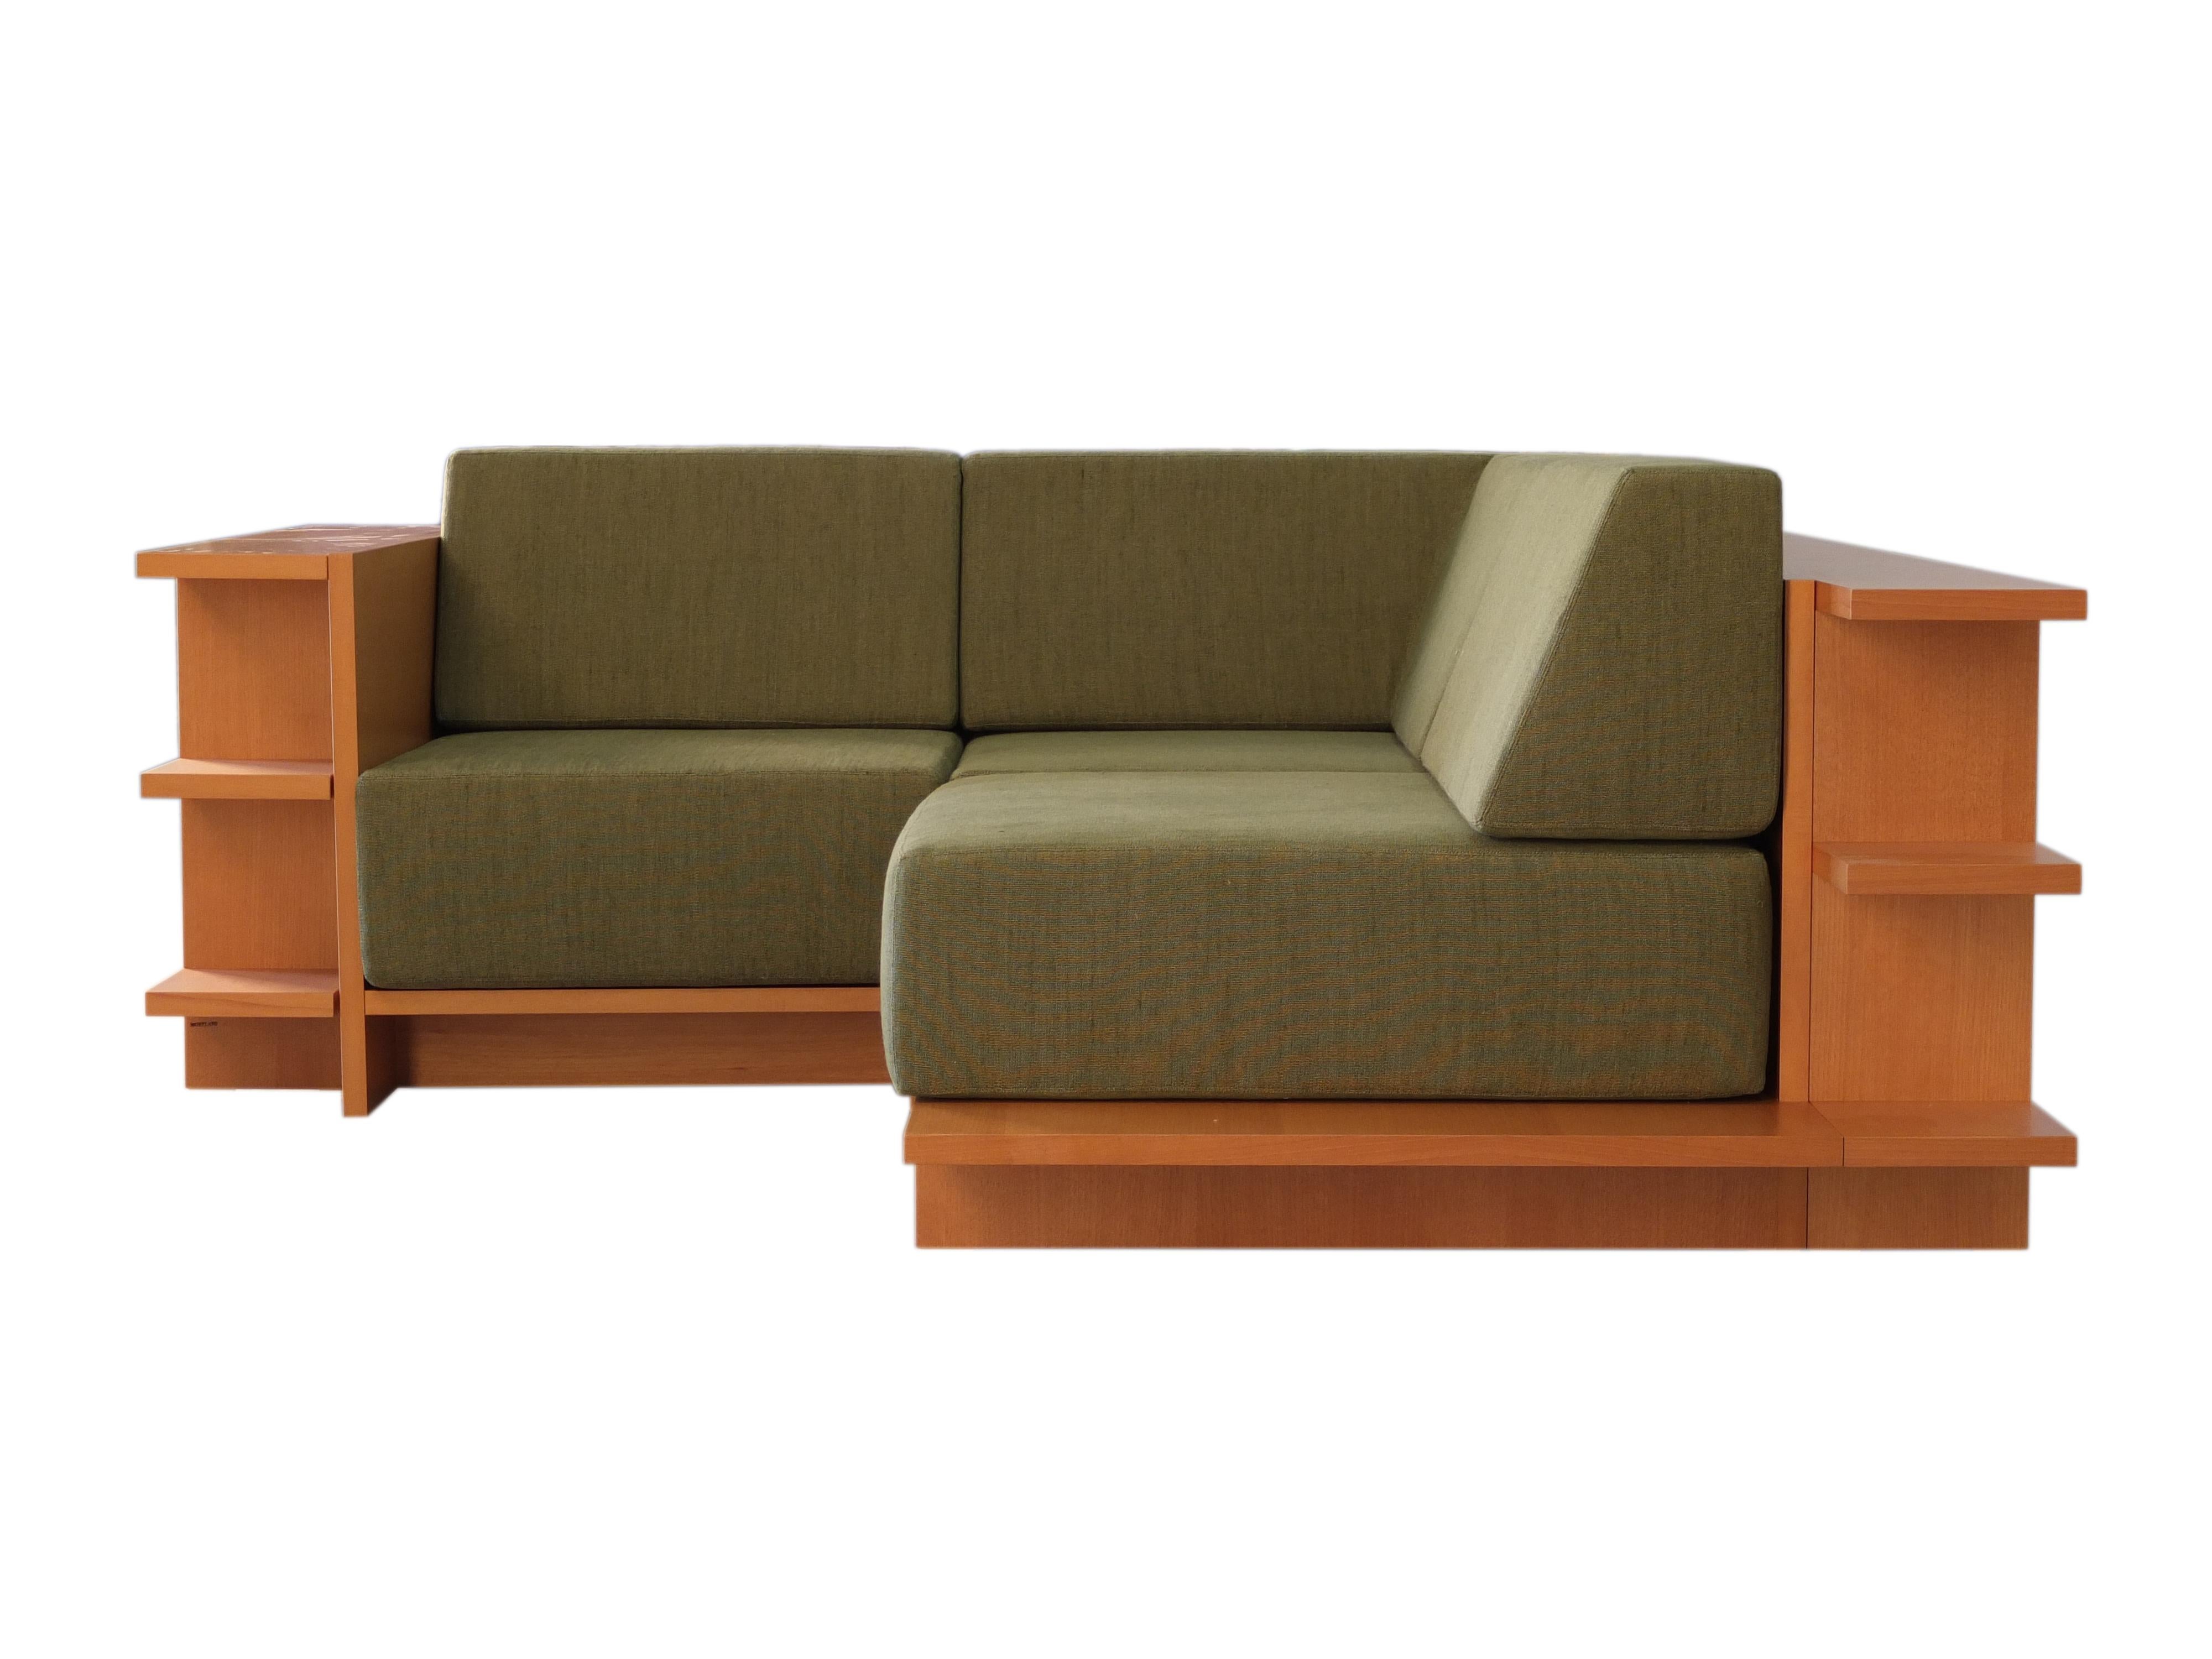 Contemporary sofa with removable cushions, frame made of solid cherrywood or ashwood
Modular structure
Upholstered with fabrics, velvet or leather
Available in different finishes
Customizable.
  